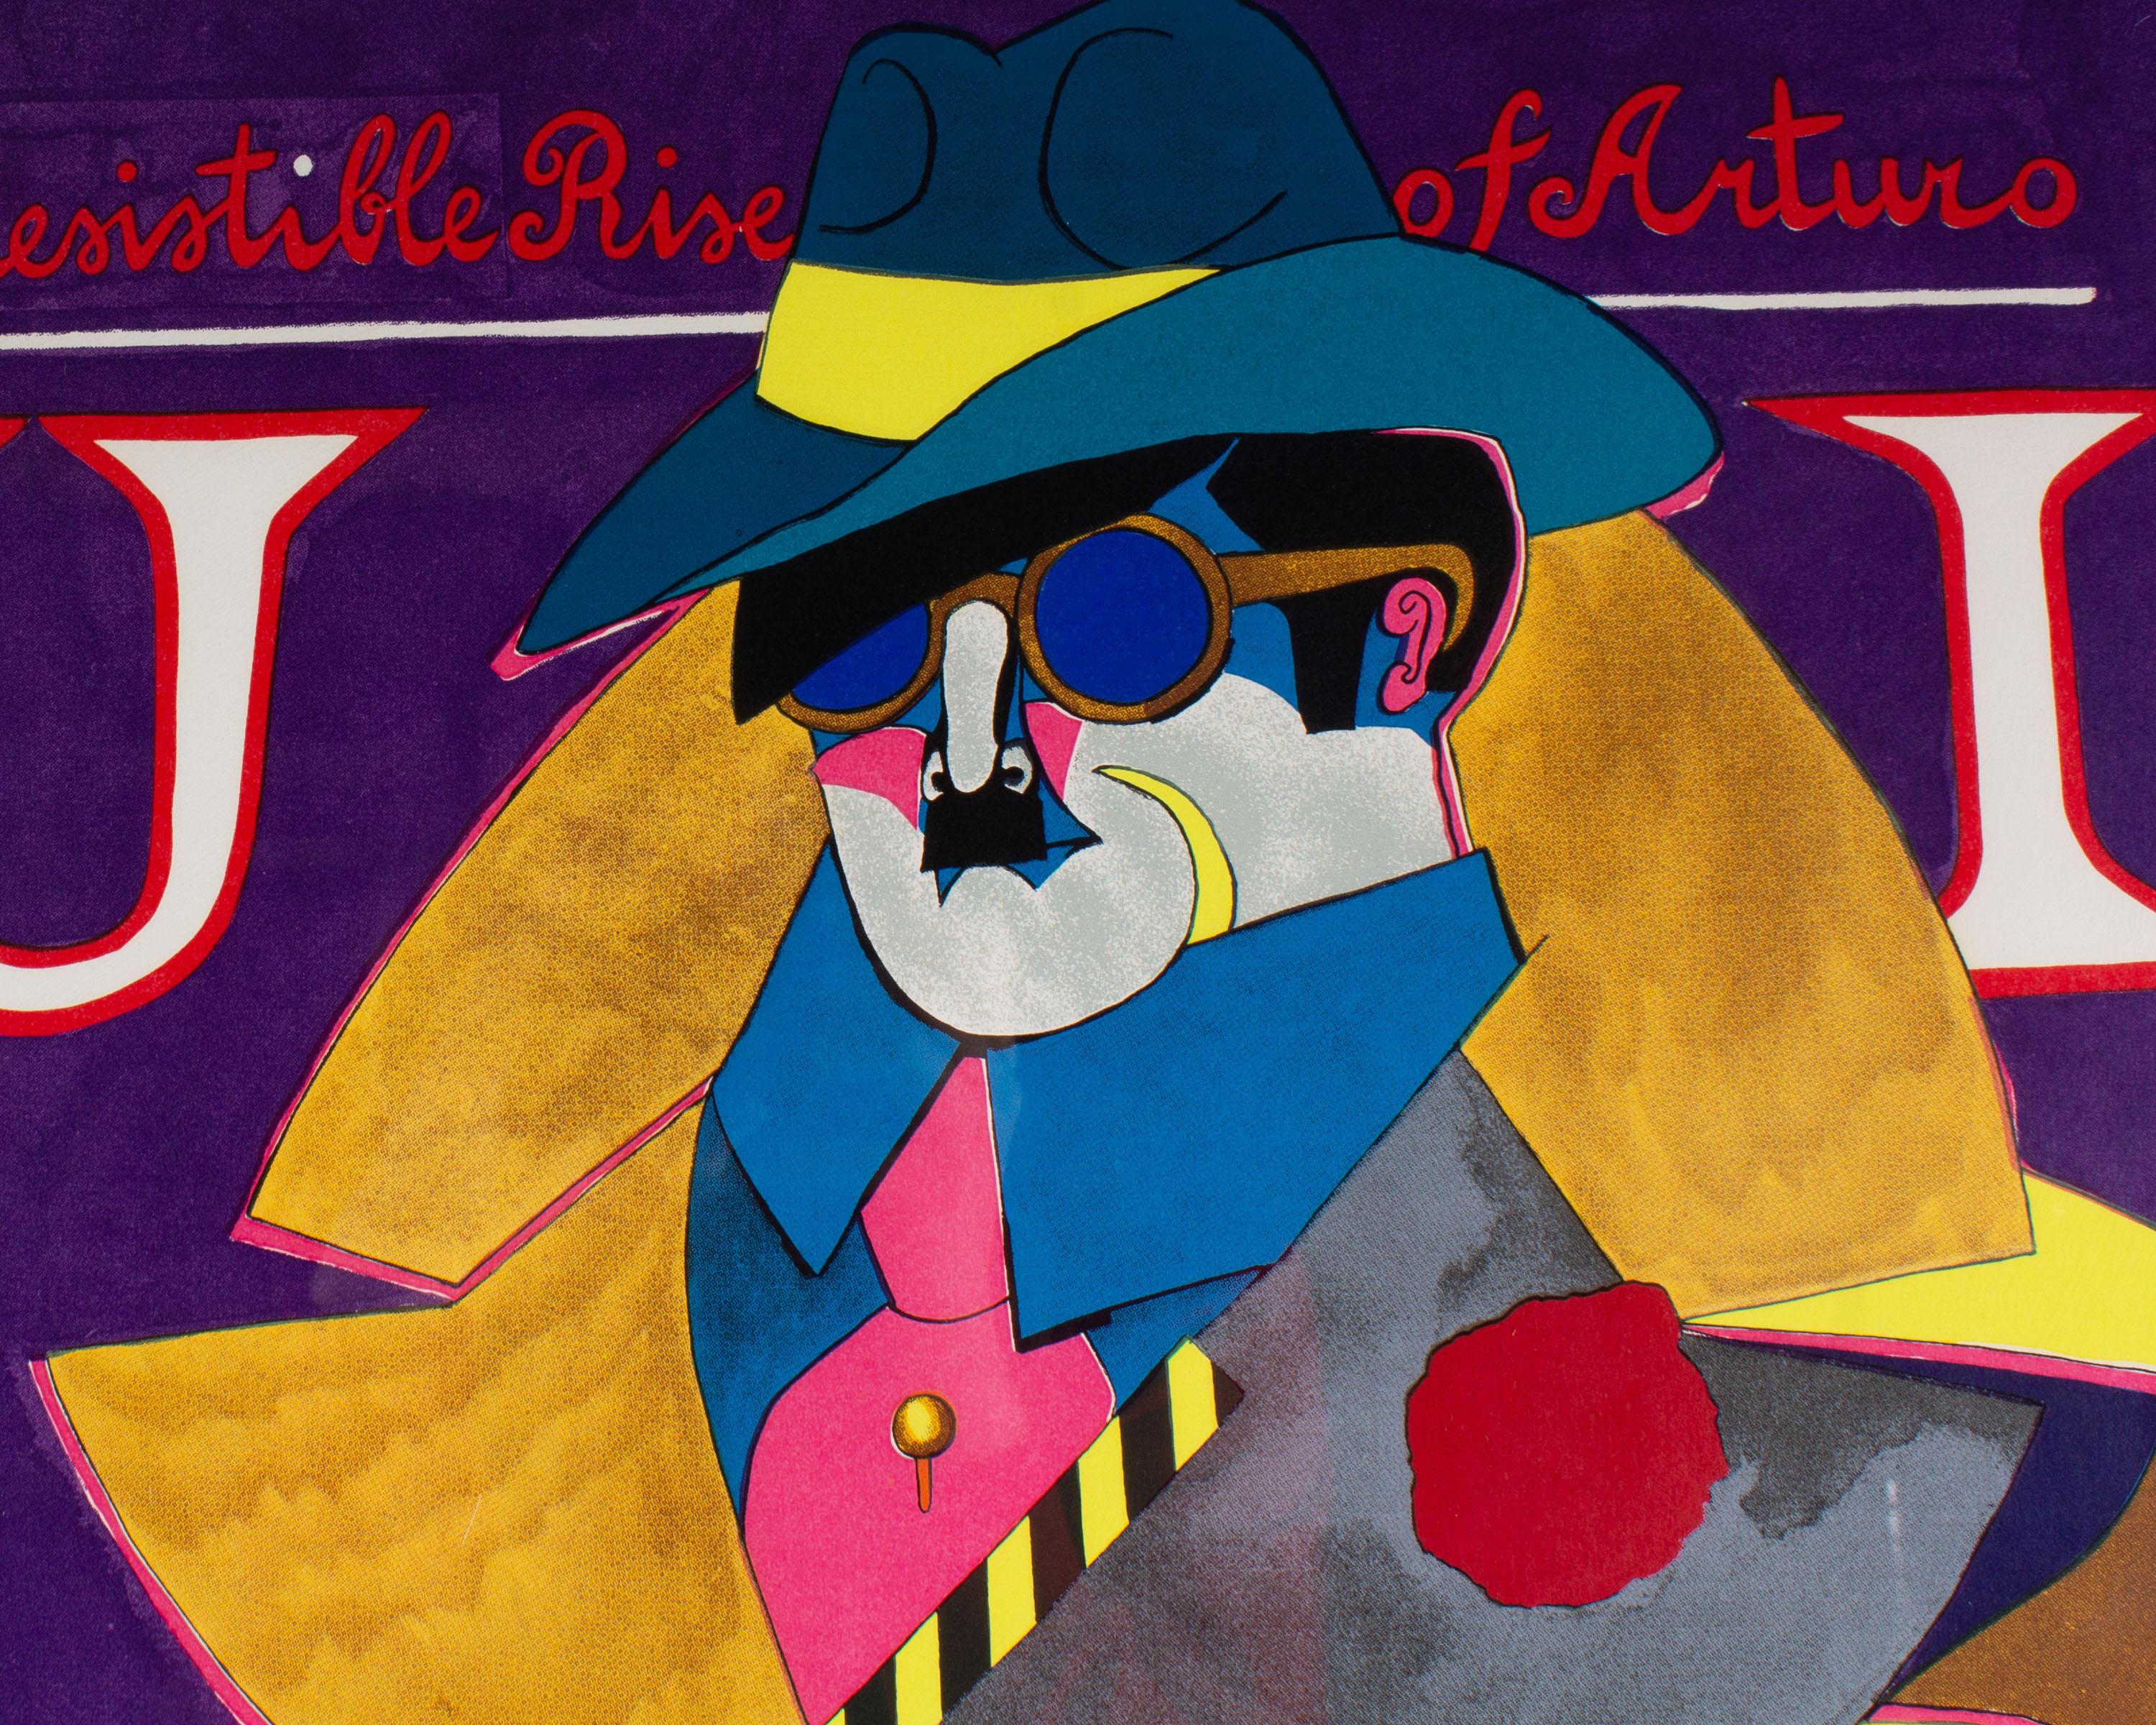 A 1968 limited edition lithograph by the German-American artist Richard Lindner (1901-1978). Titled The Resistible Rise of Artuo Ui, this print was printed in 1968 and was part of a collection produced by Multiples. Signed in pencil and numbered